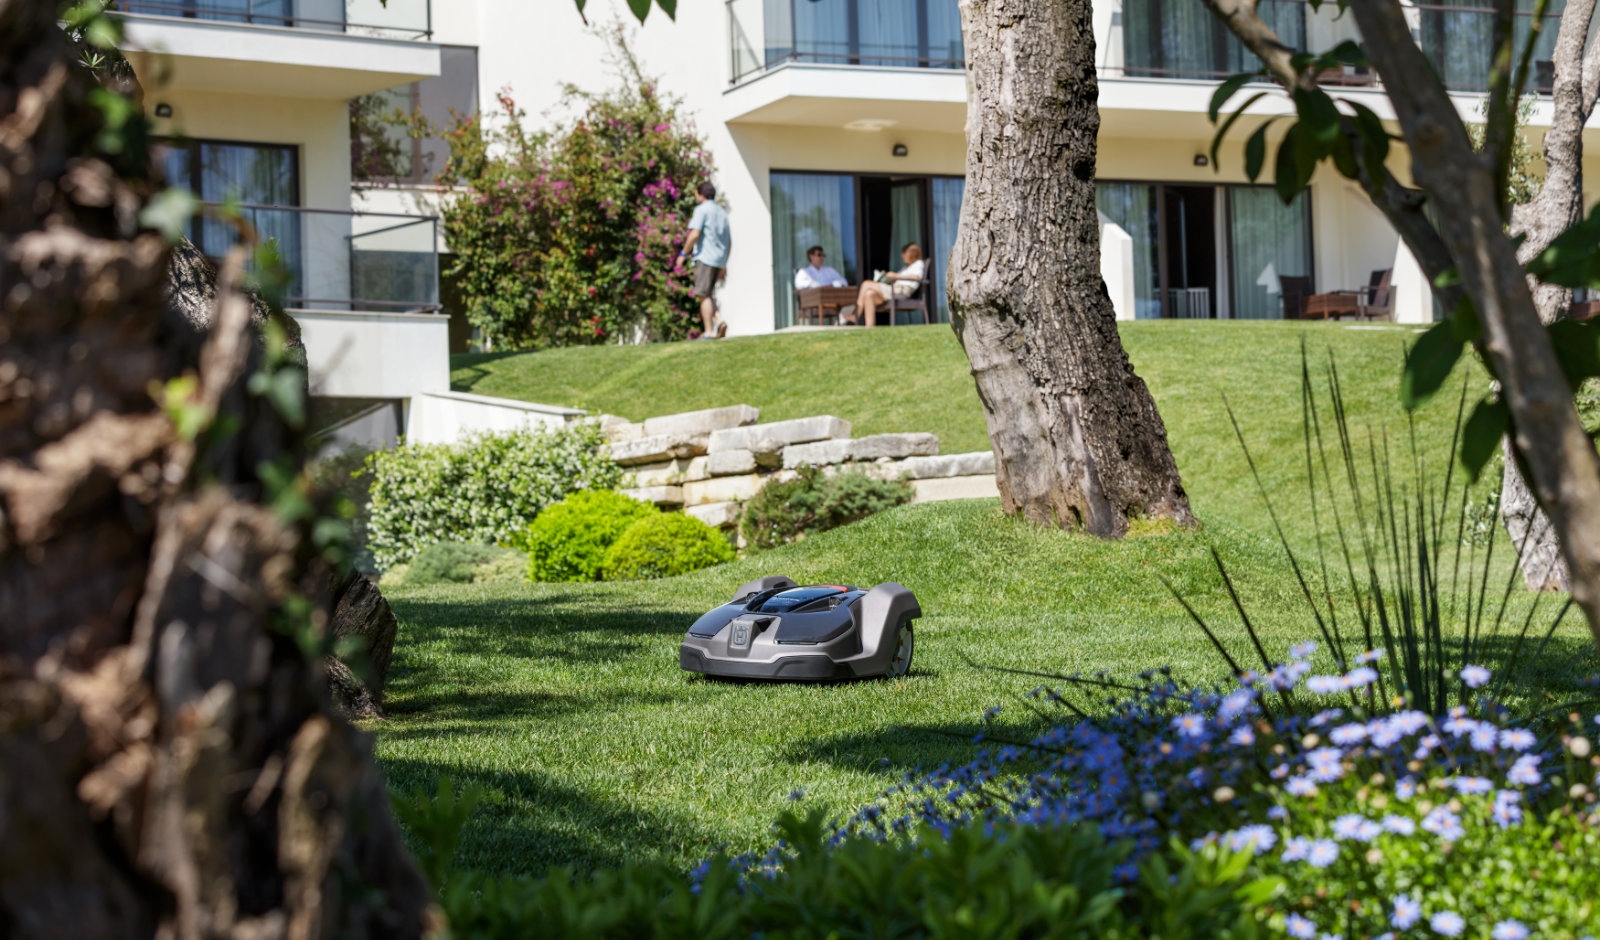 Robotic lawnmower, or the best thing you can buy for your garden?